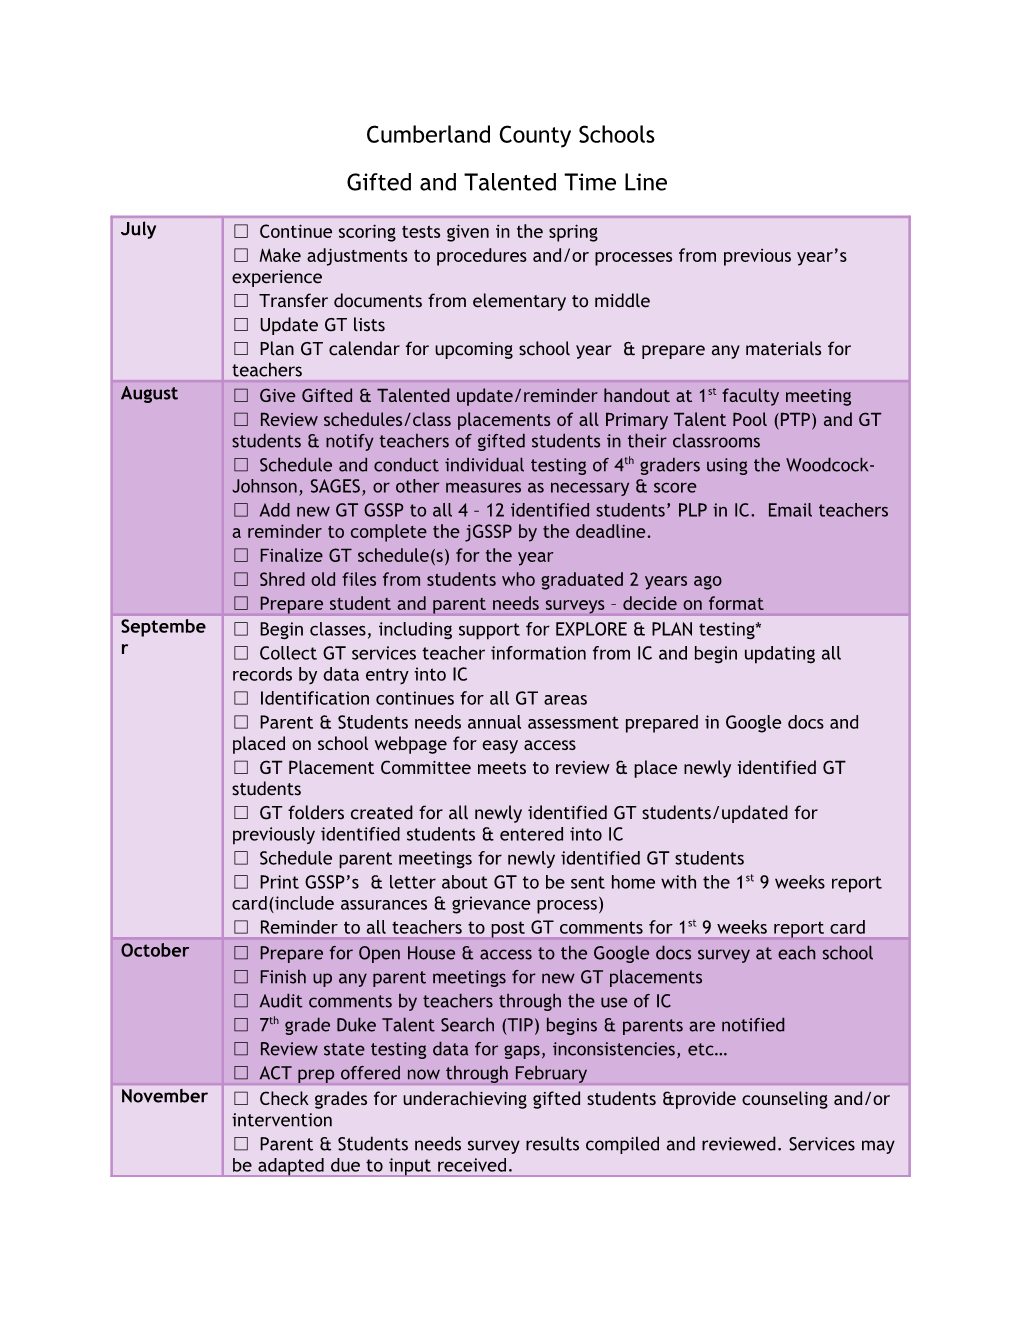 Gifted and Talented Time Line